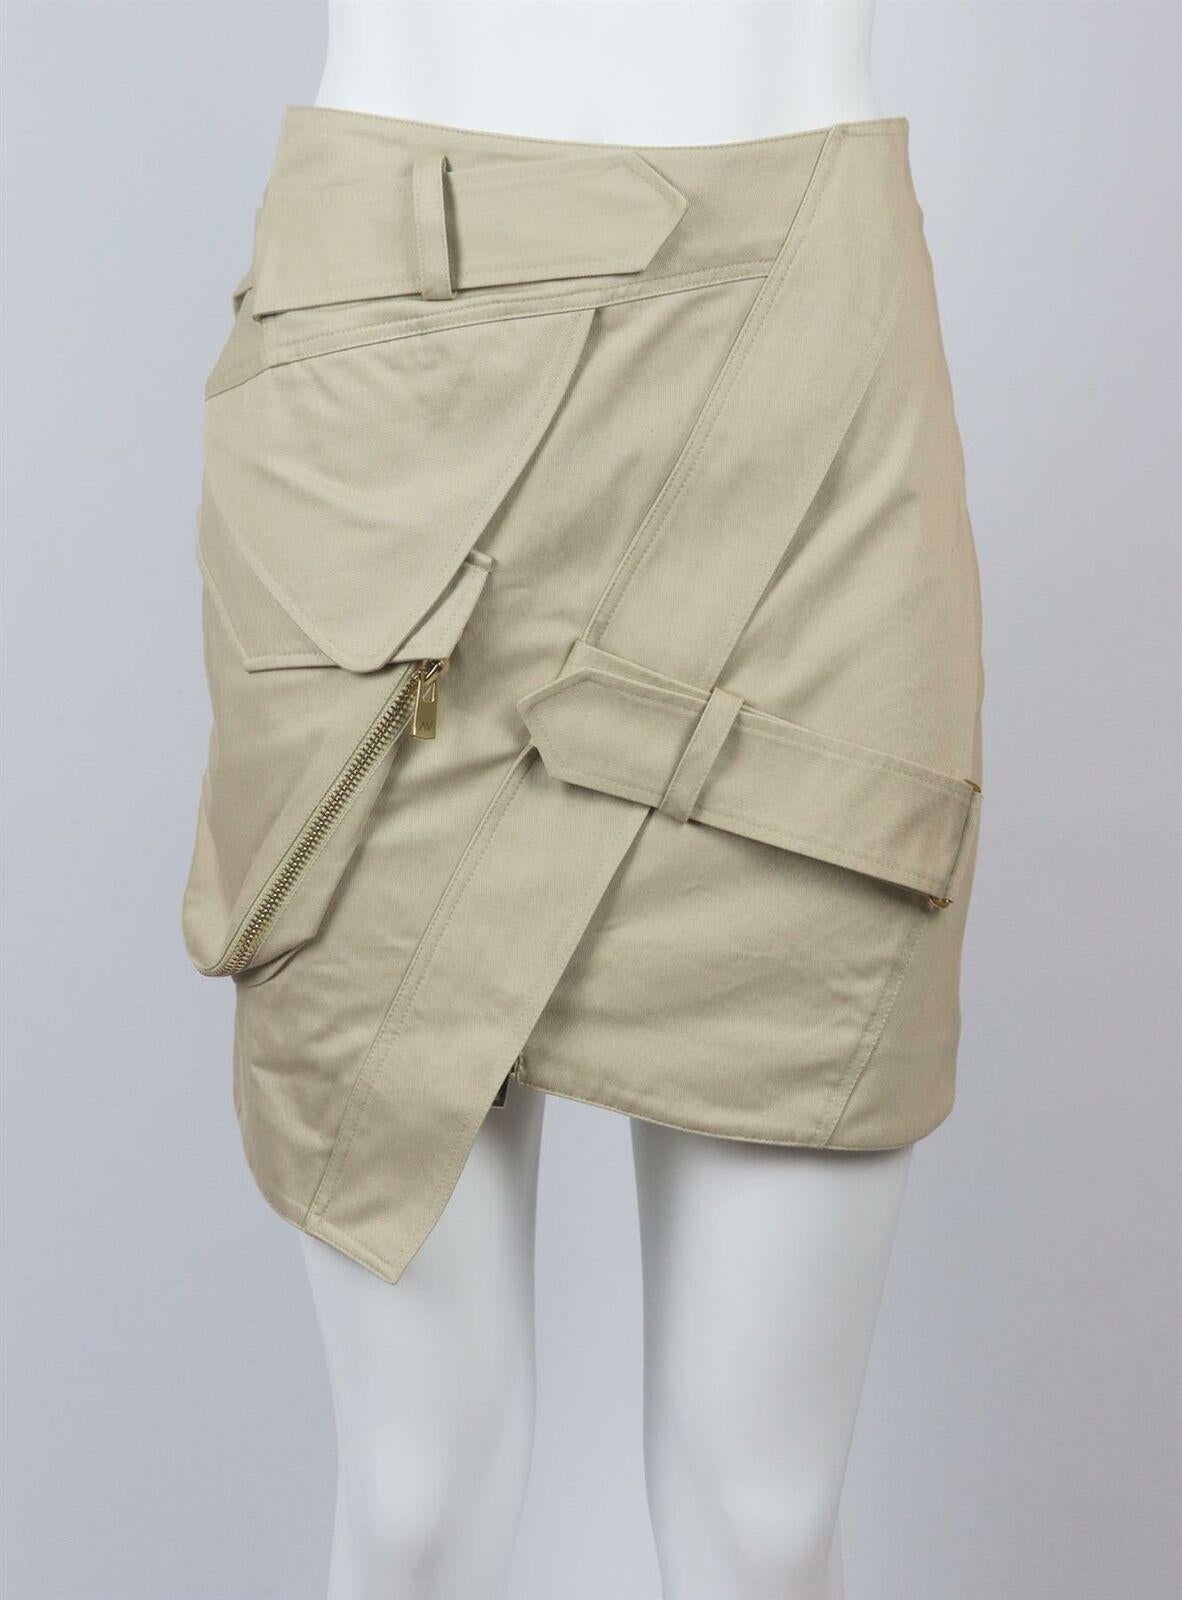 Alexandre Vauthier's mini skirt feels elevated thanks to its asymmetric hem, it's cut from cotton-twill in a wrap-effect silhouette that sits just above the hips.
Beige cotton-twill.
Concealed zip fastening at front.
100% Cotton.

Size: FR 38 (UK